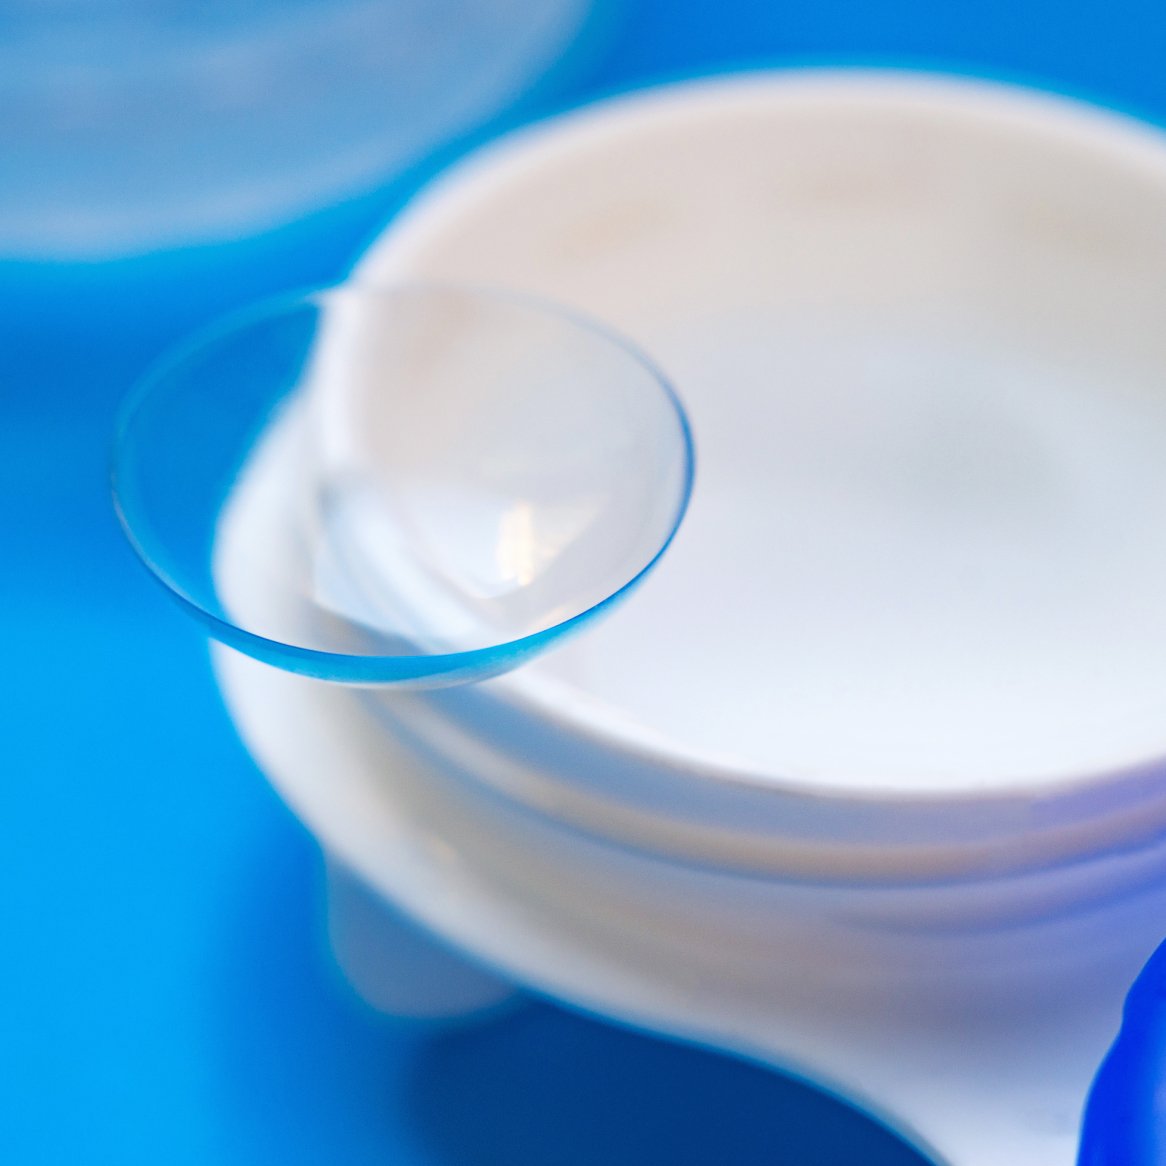 Close-up image of a contact lens placed on a storage case